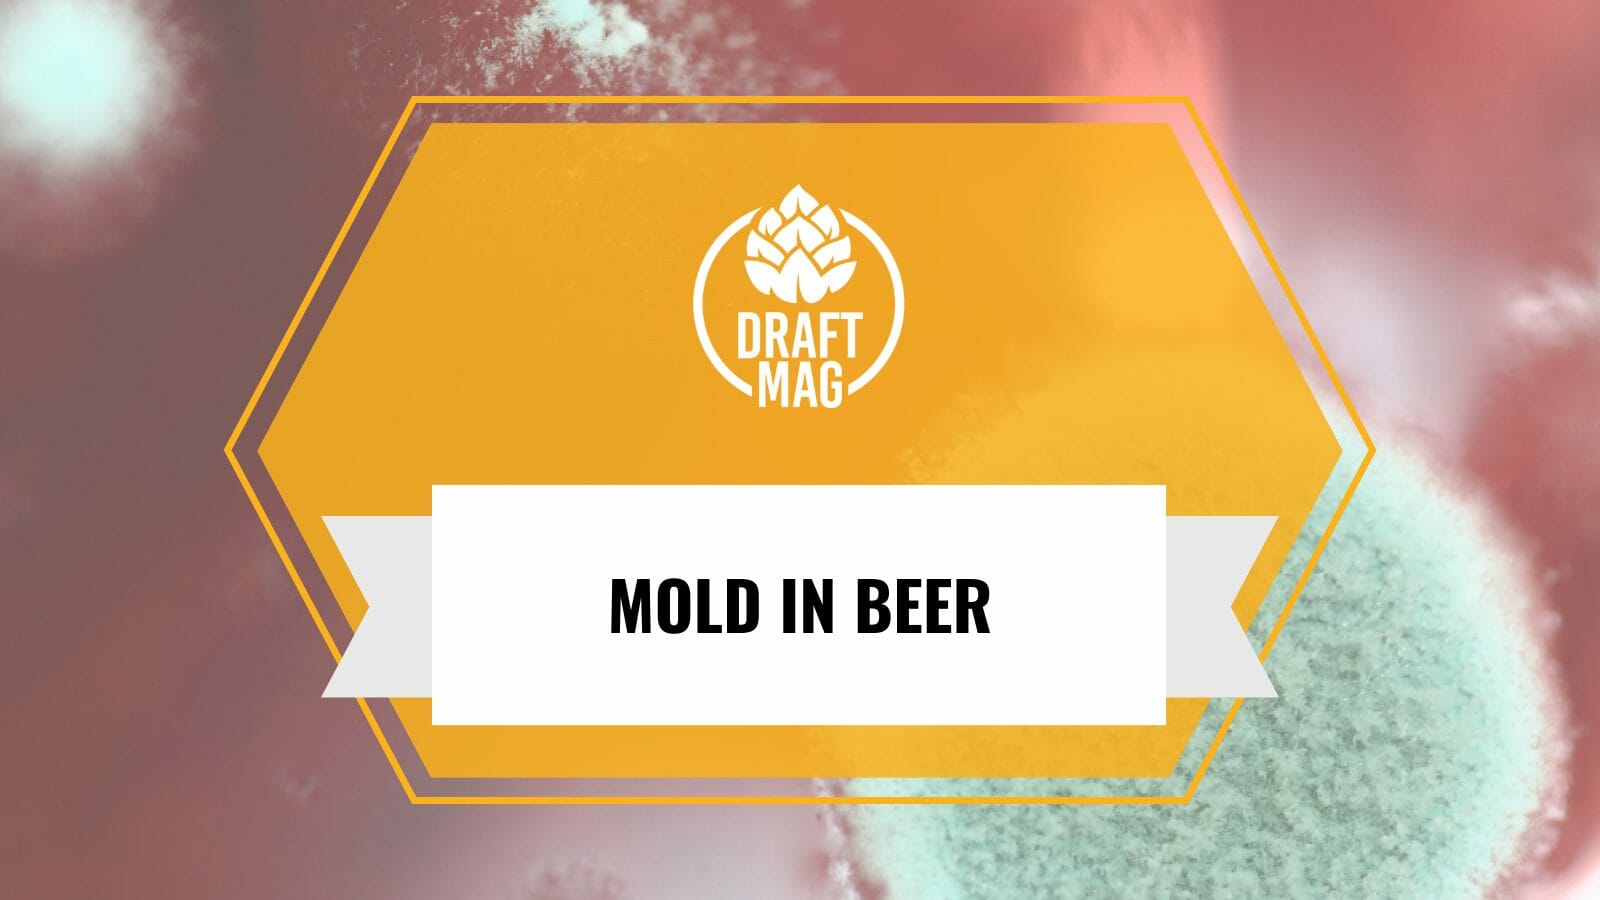 Mold in beer